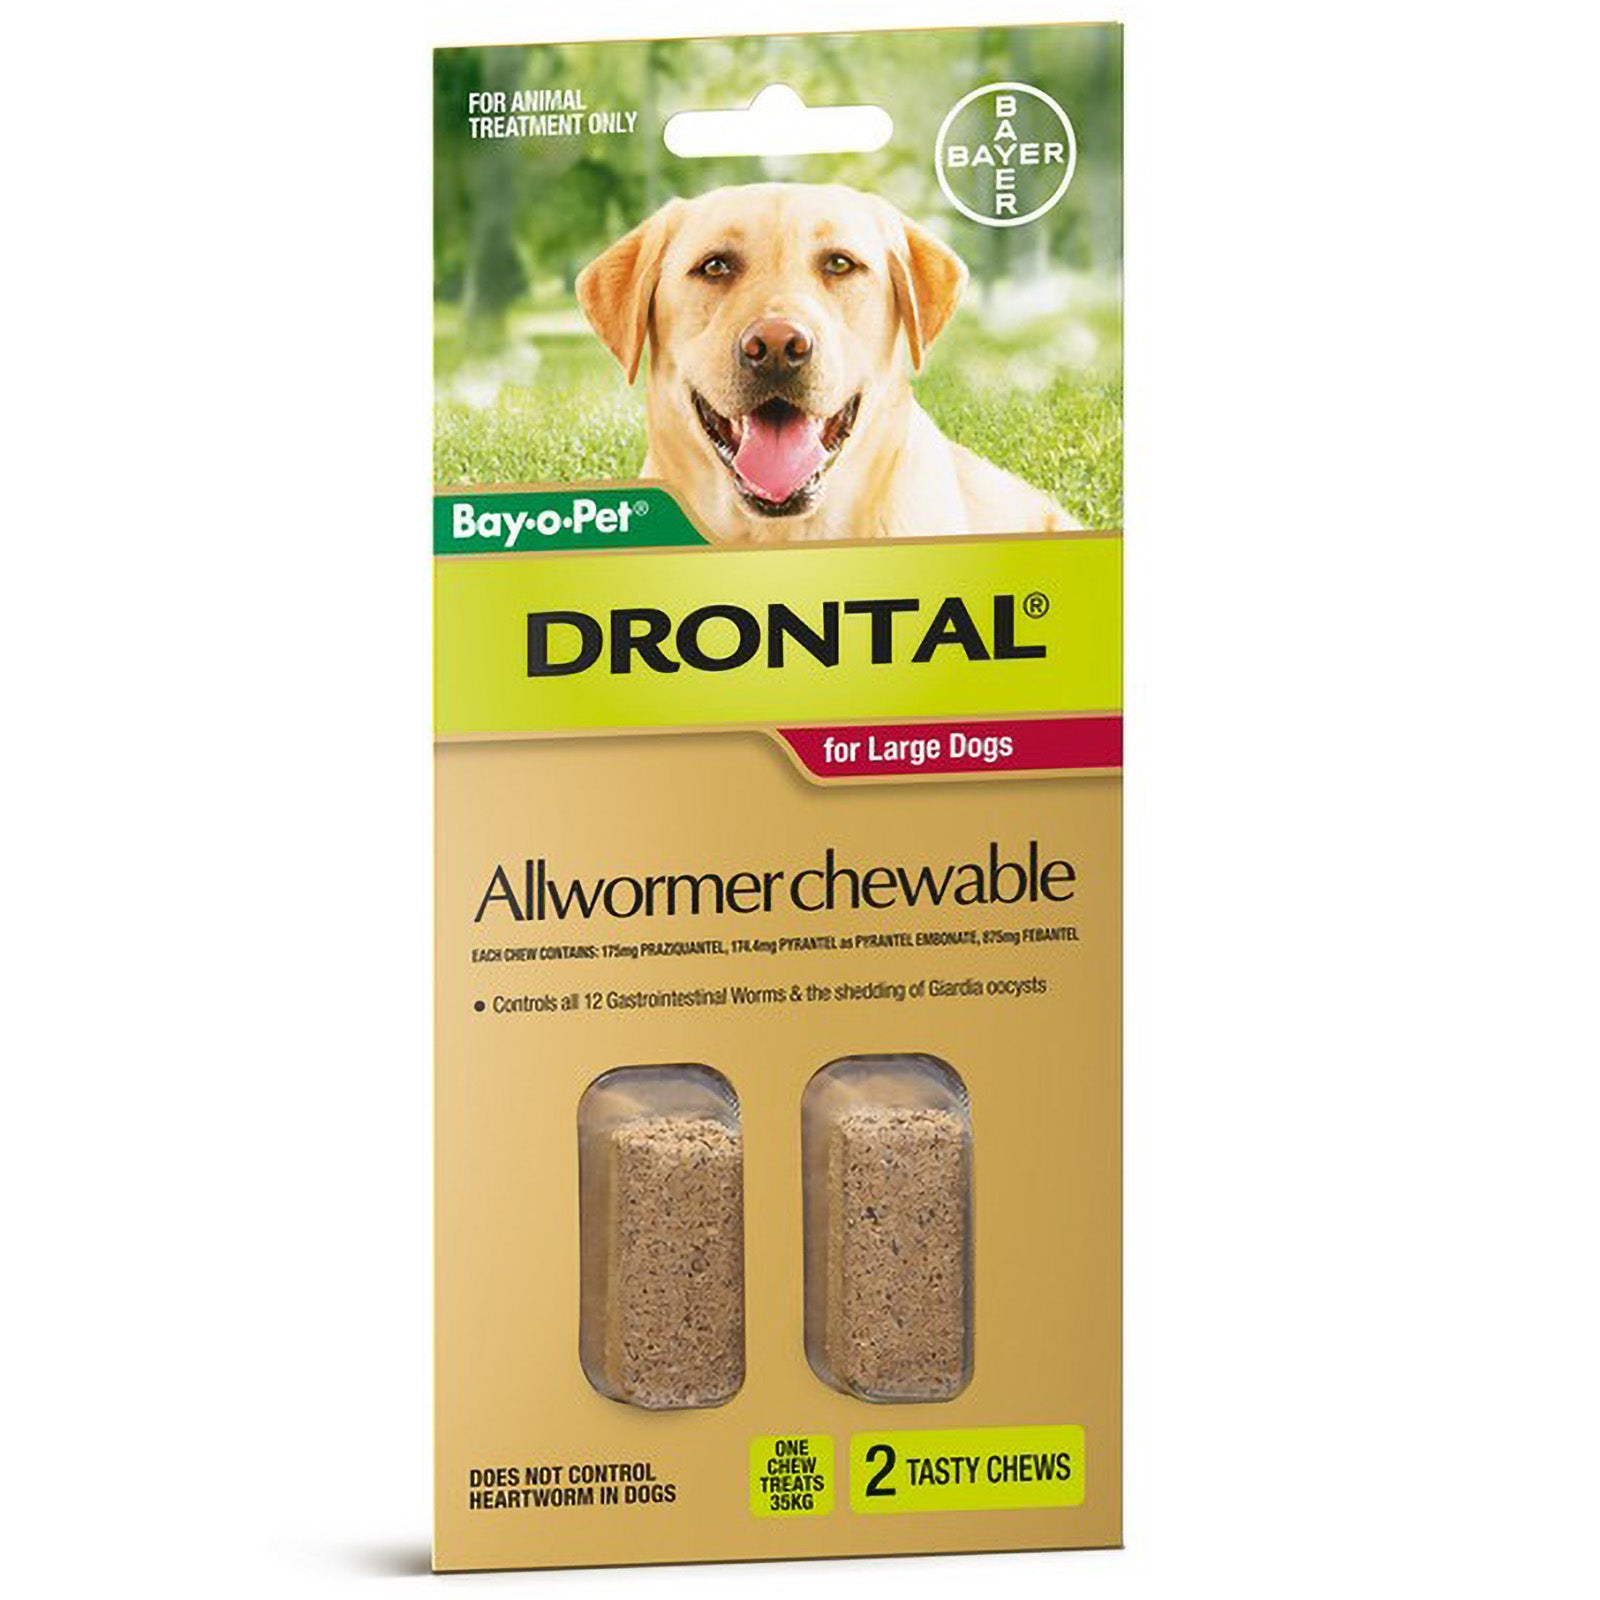 Drontal Chewable Worming Tablets for Dogs